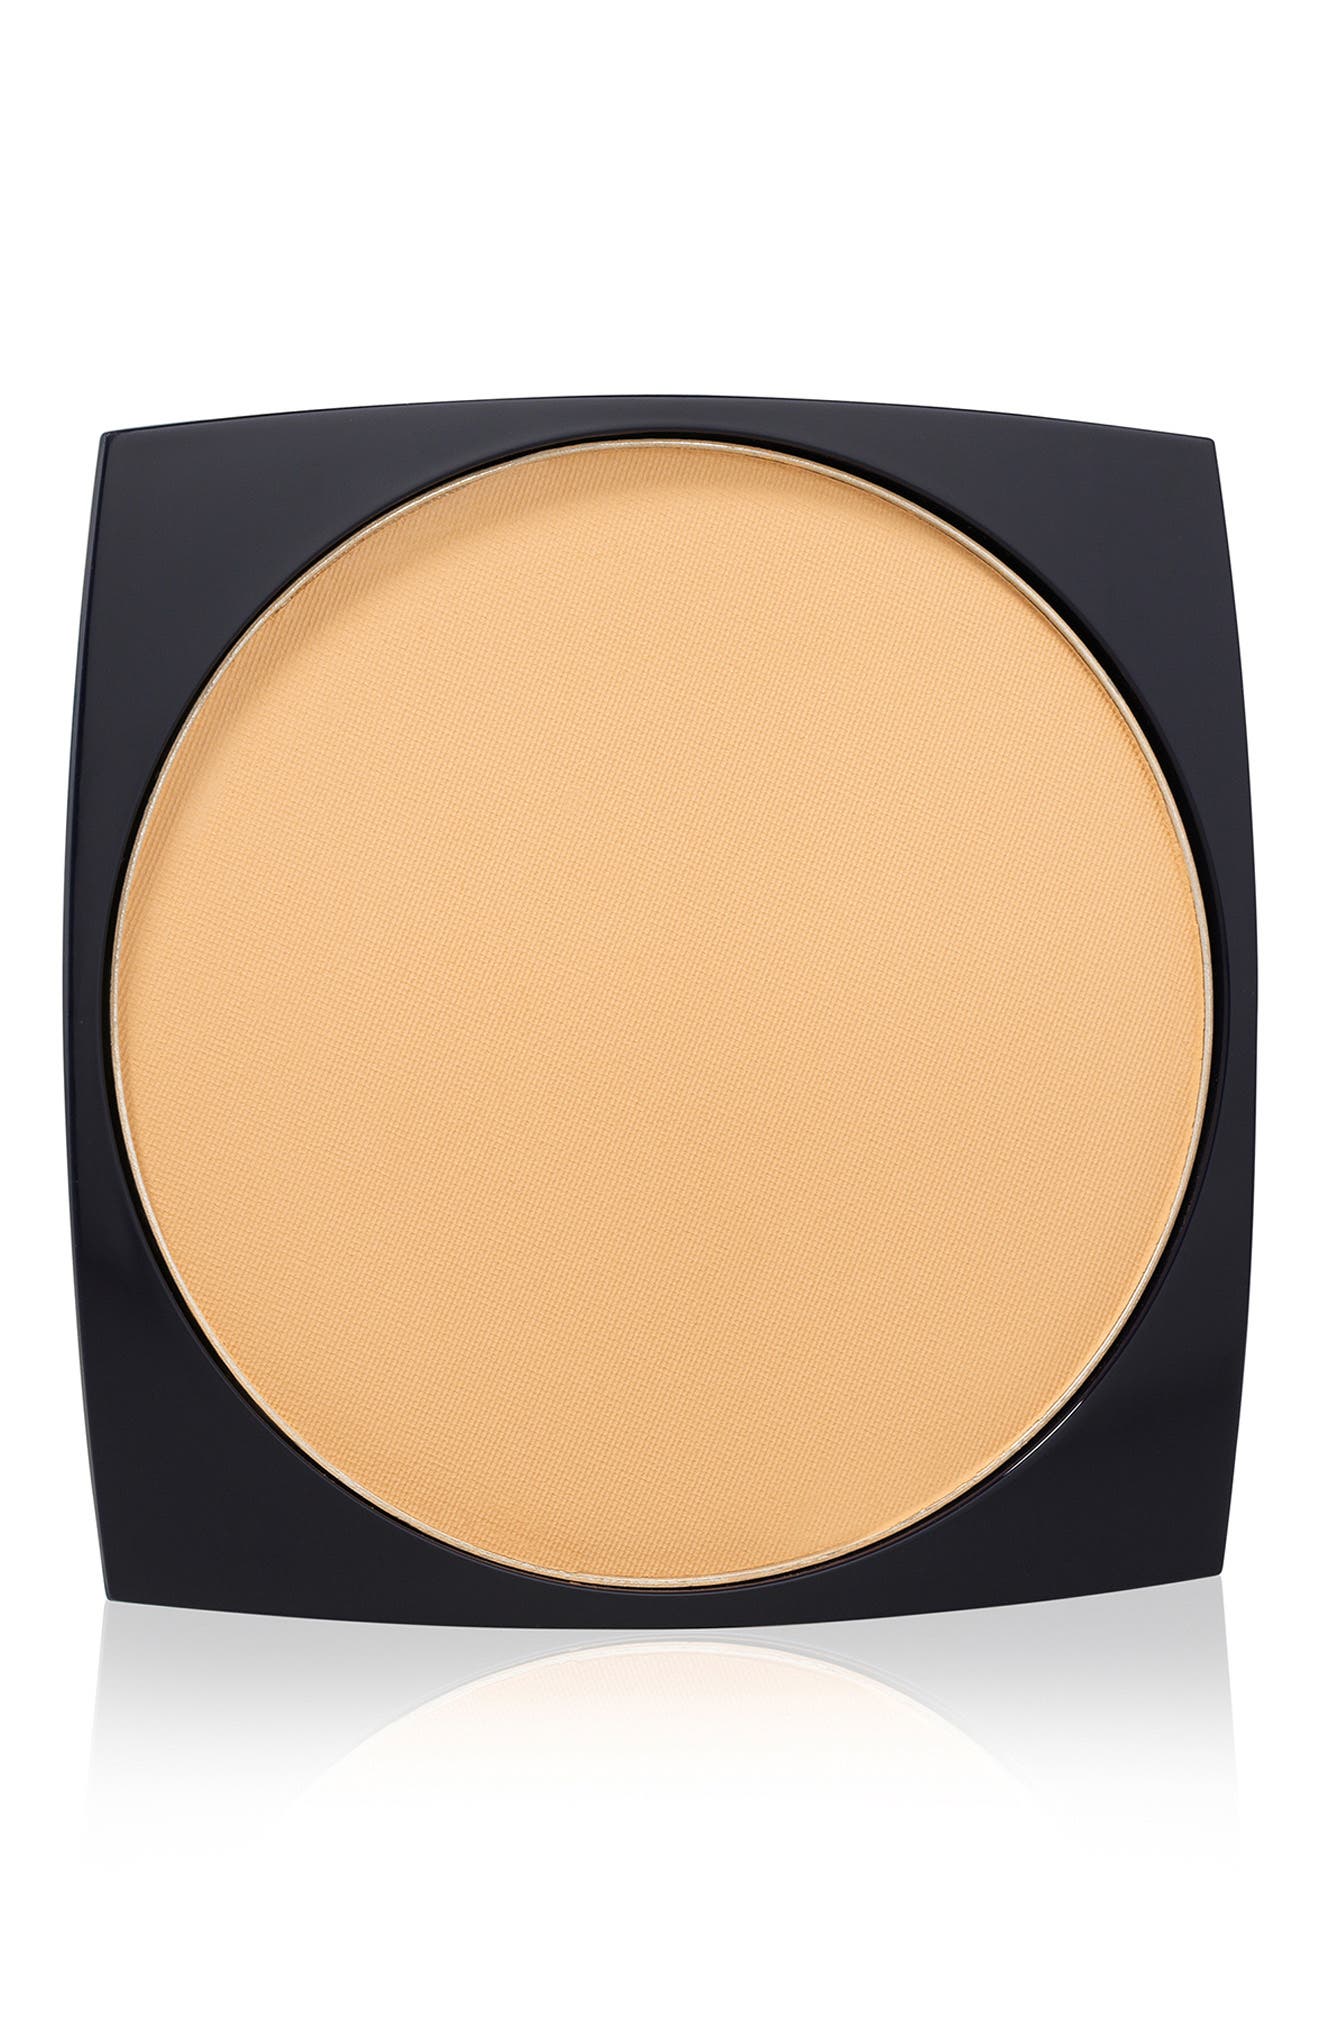 Estee Lauder Double Wear Stay In Place Matte Powder Foundation Refill in 4N2 Spiced Sand